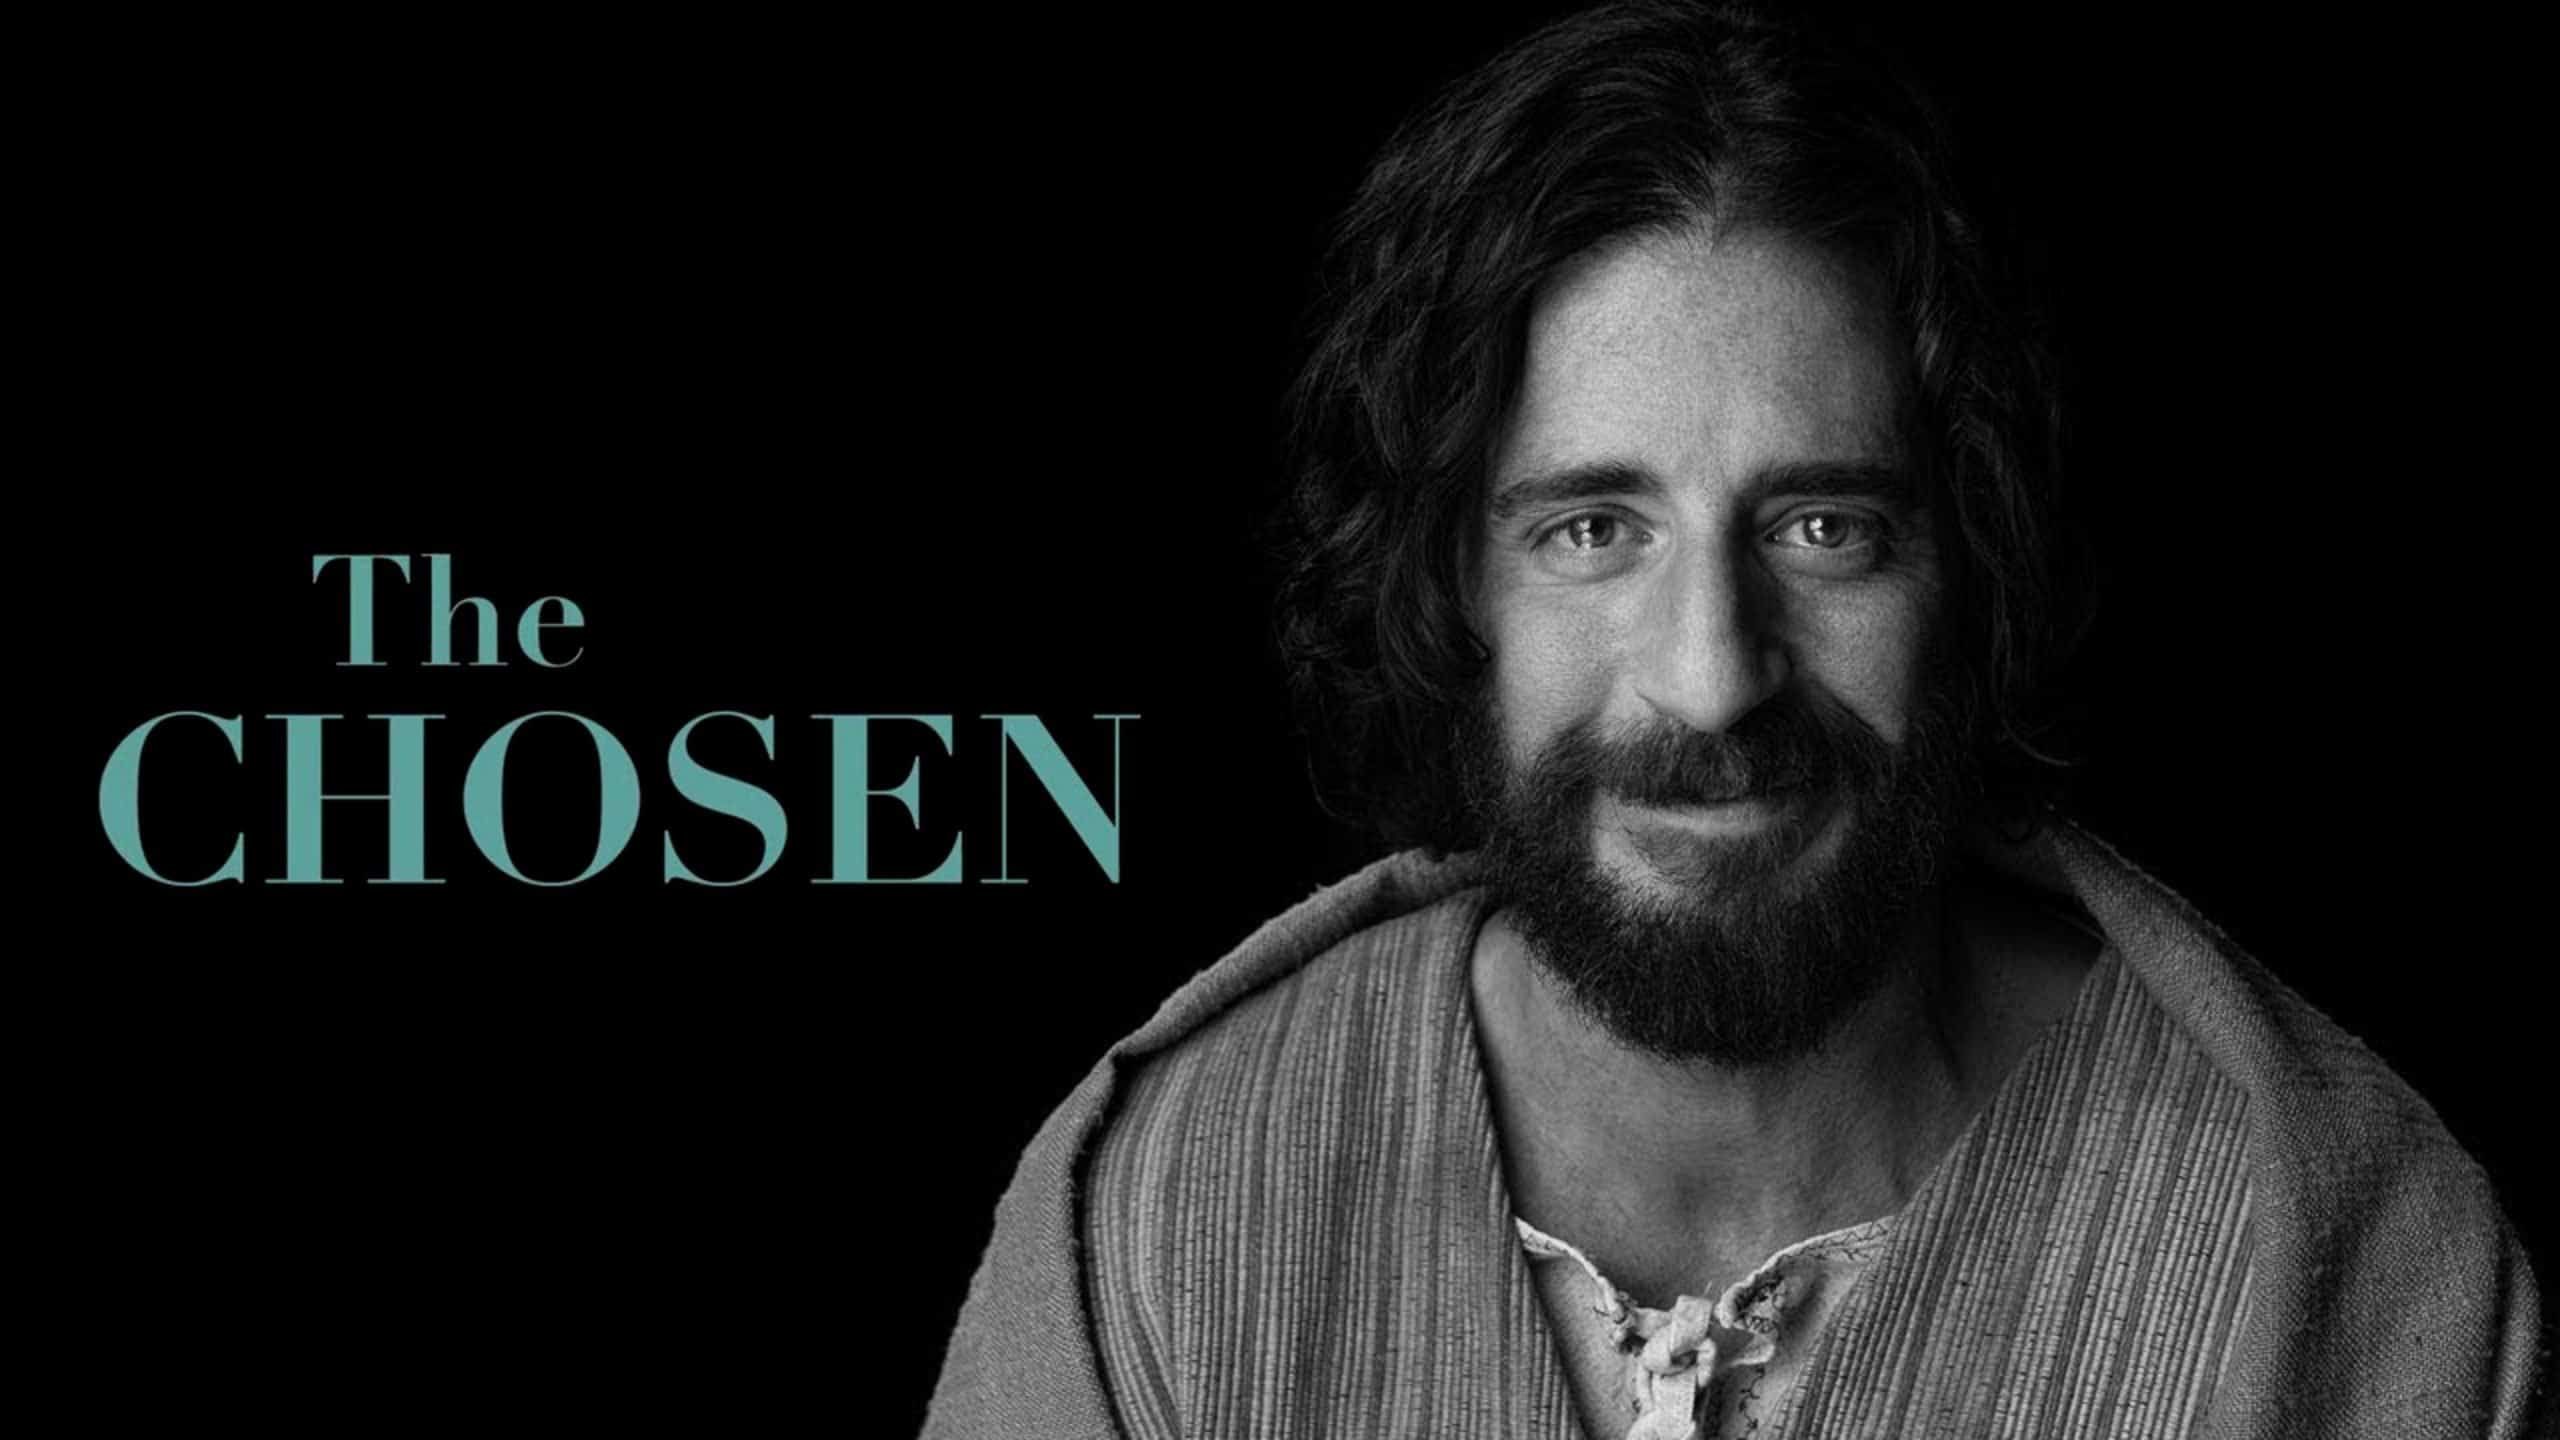 Jonathan Roumi as Jesus in the Dallas Jenkins show "Cast if the widely popular and critically acclaimed show "The Chosen"